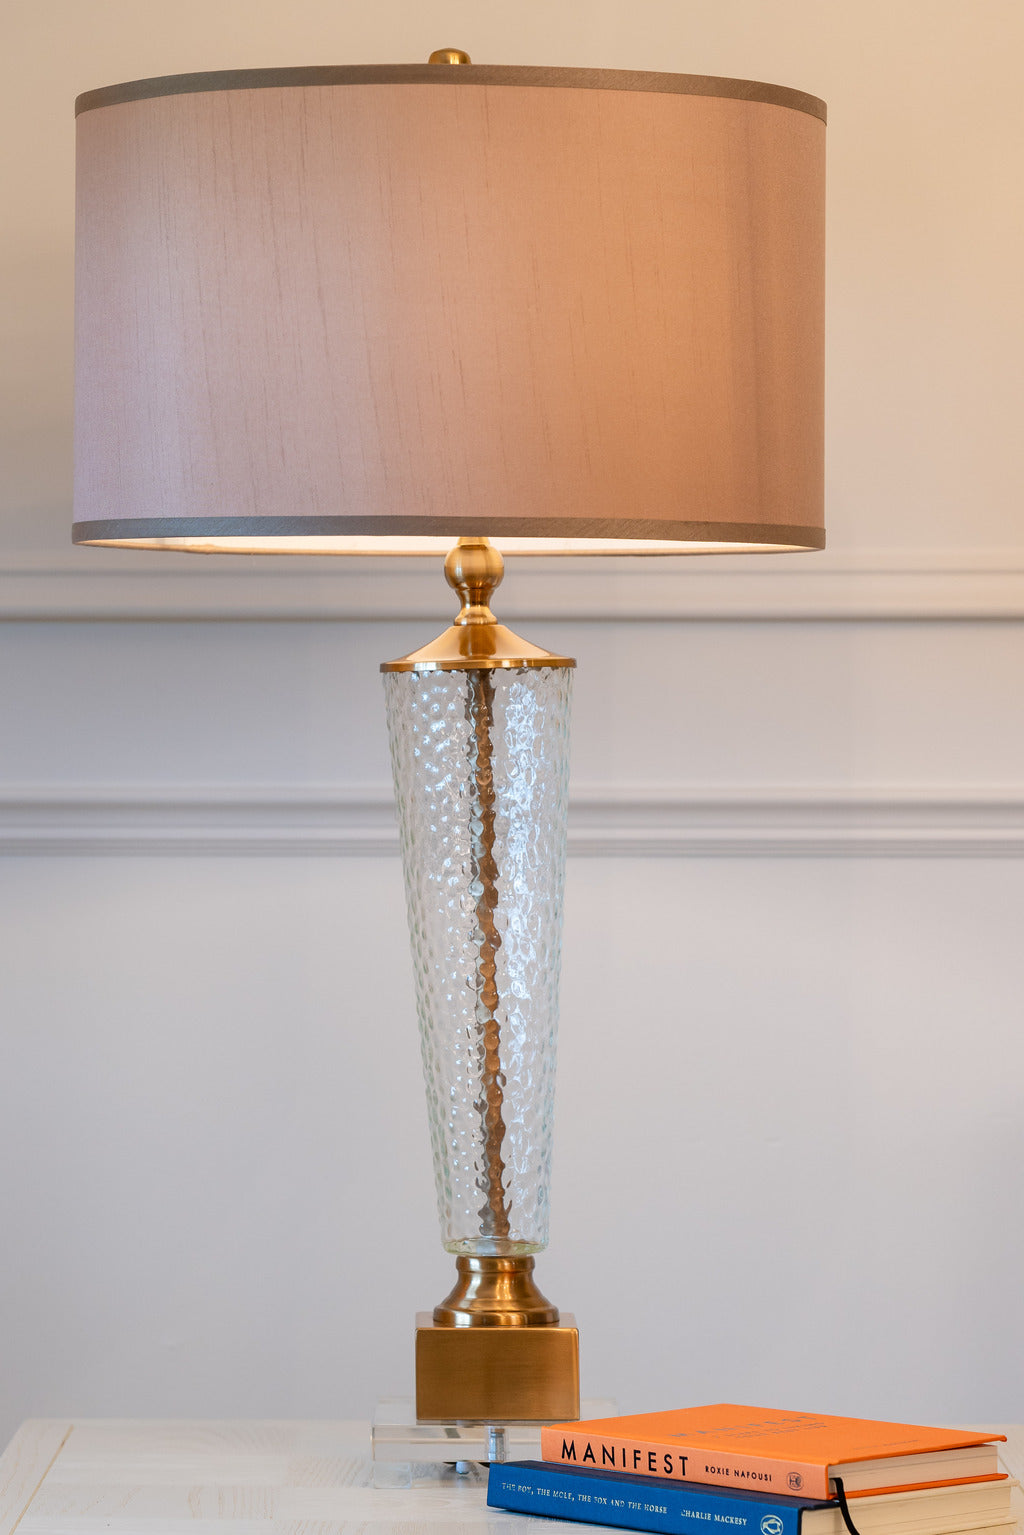 Glass lamp, gold lamp, Table lamp, glass and gold lamp, pink lampshade